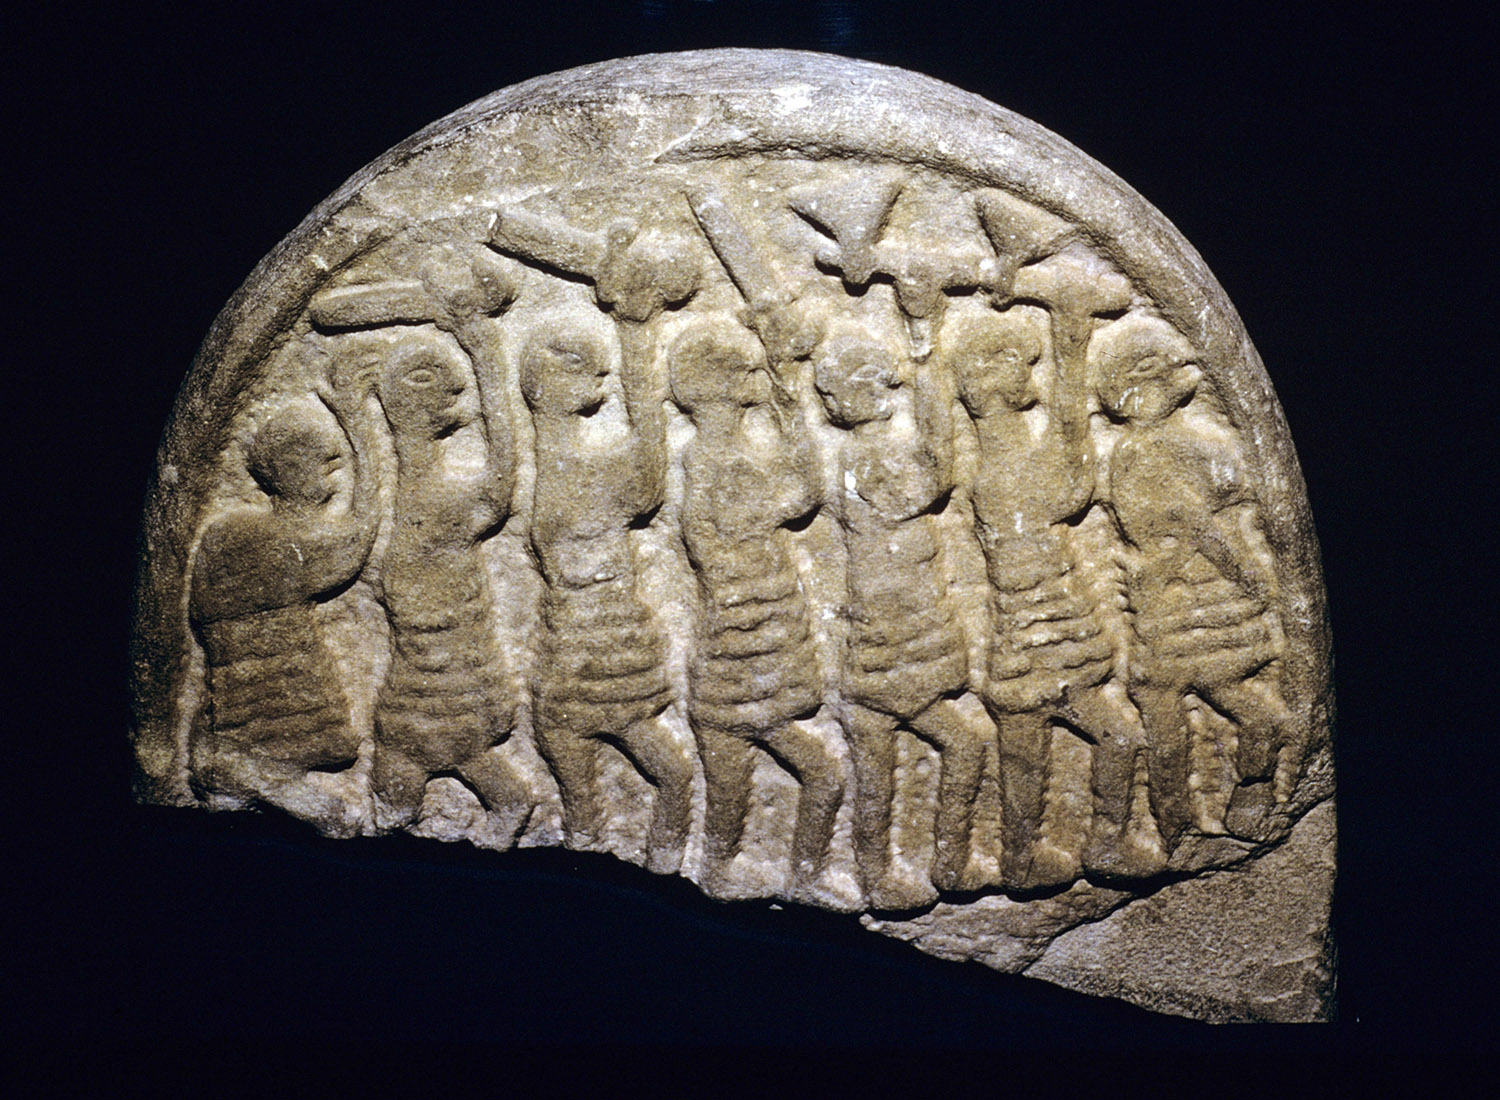 The ninth-century grave marker found at Lindisfarne, known as the Viking Domesday stone. (Ancient Art and Architecture/Bridgeman Images)